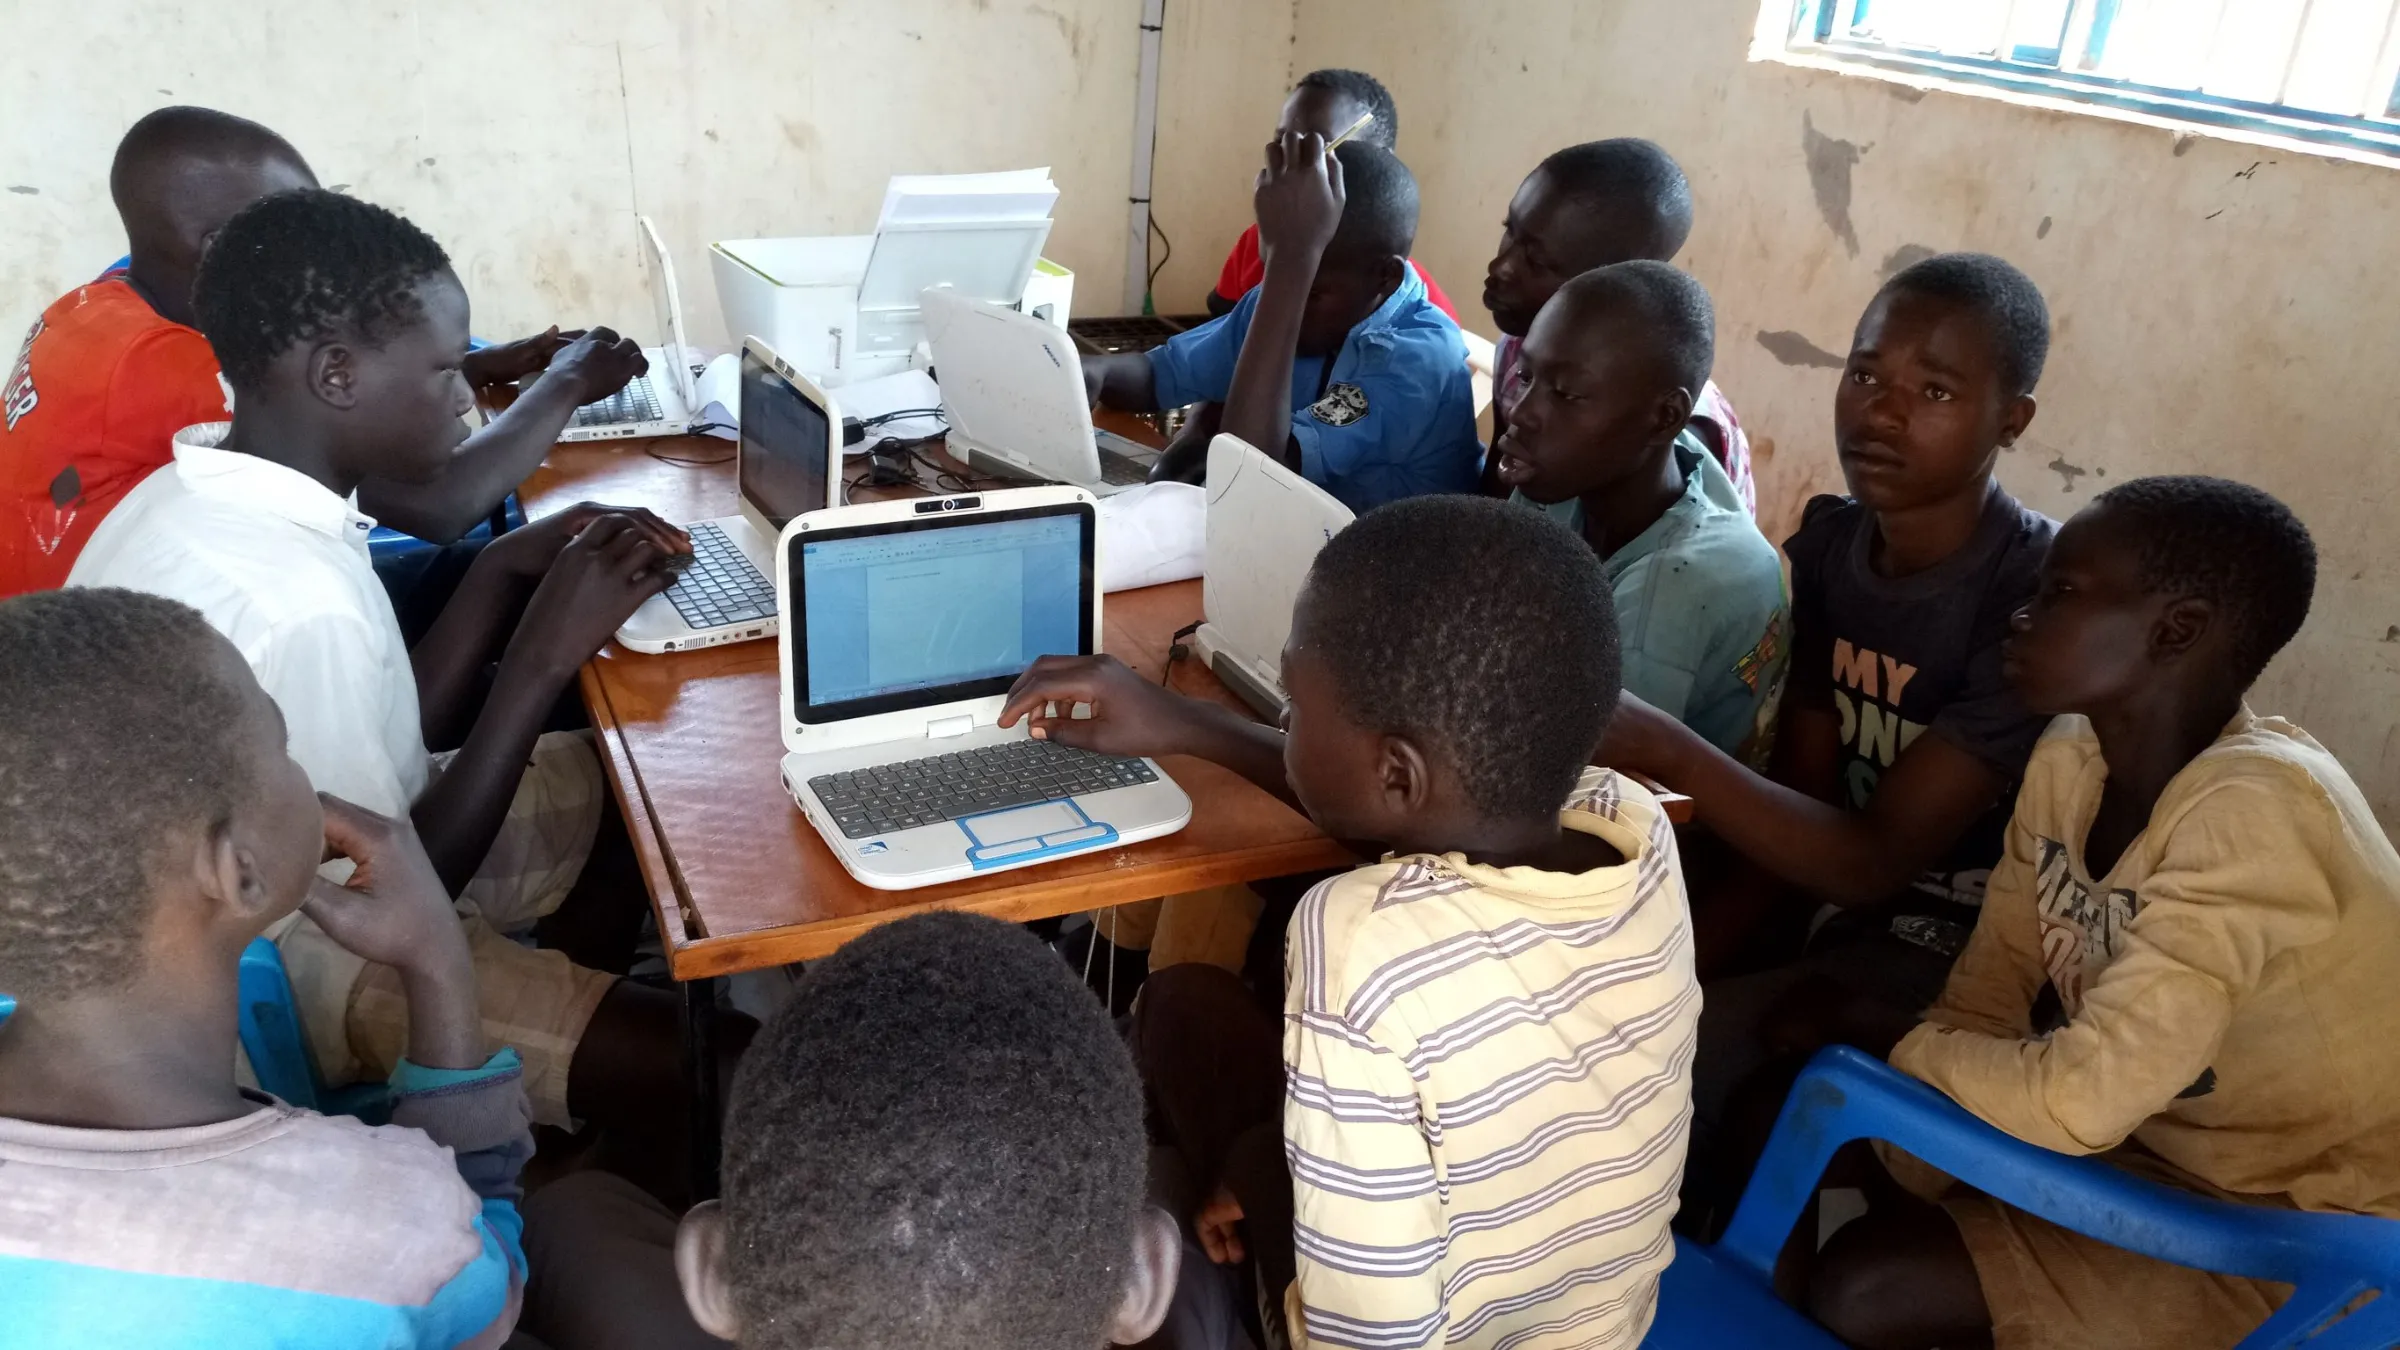 Students gather around computers during ICT training for South Sudanese refugees in the West Nile region in Northern Uganda. Thomson Reuters Foundation/Handout courtesy of BOSCO